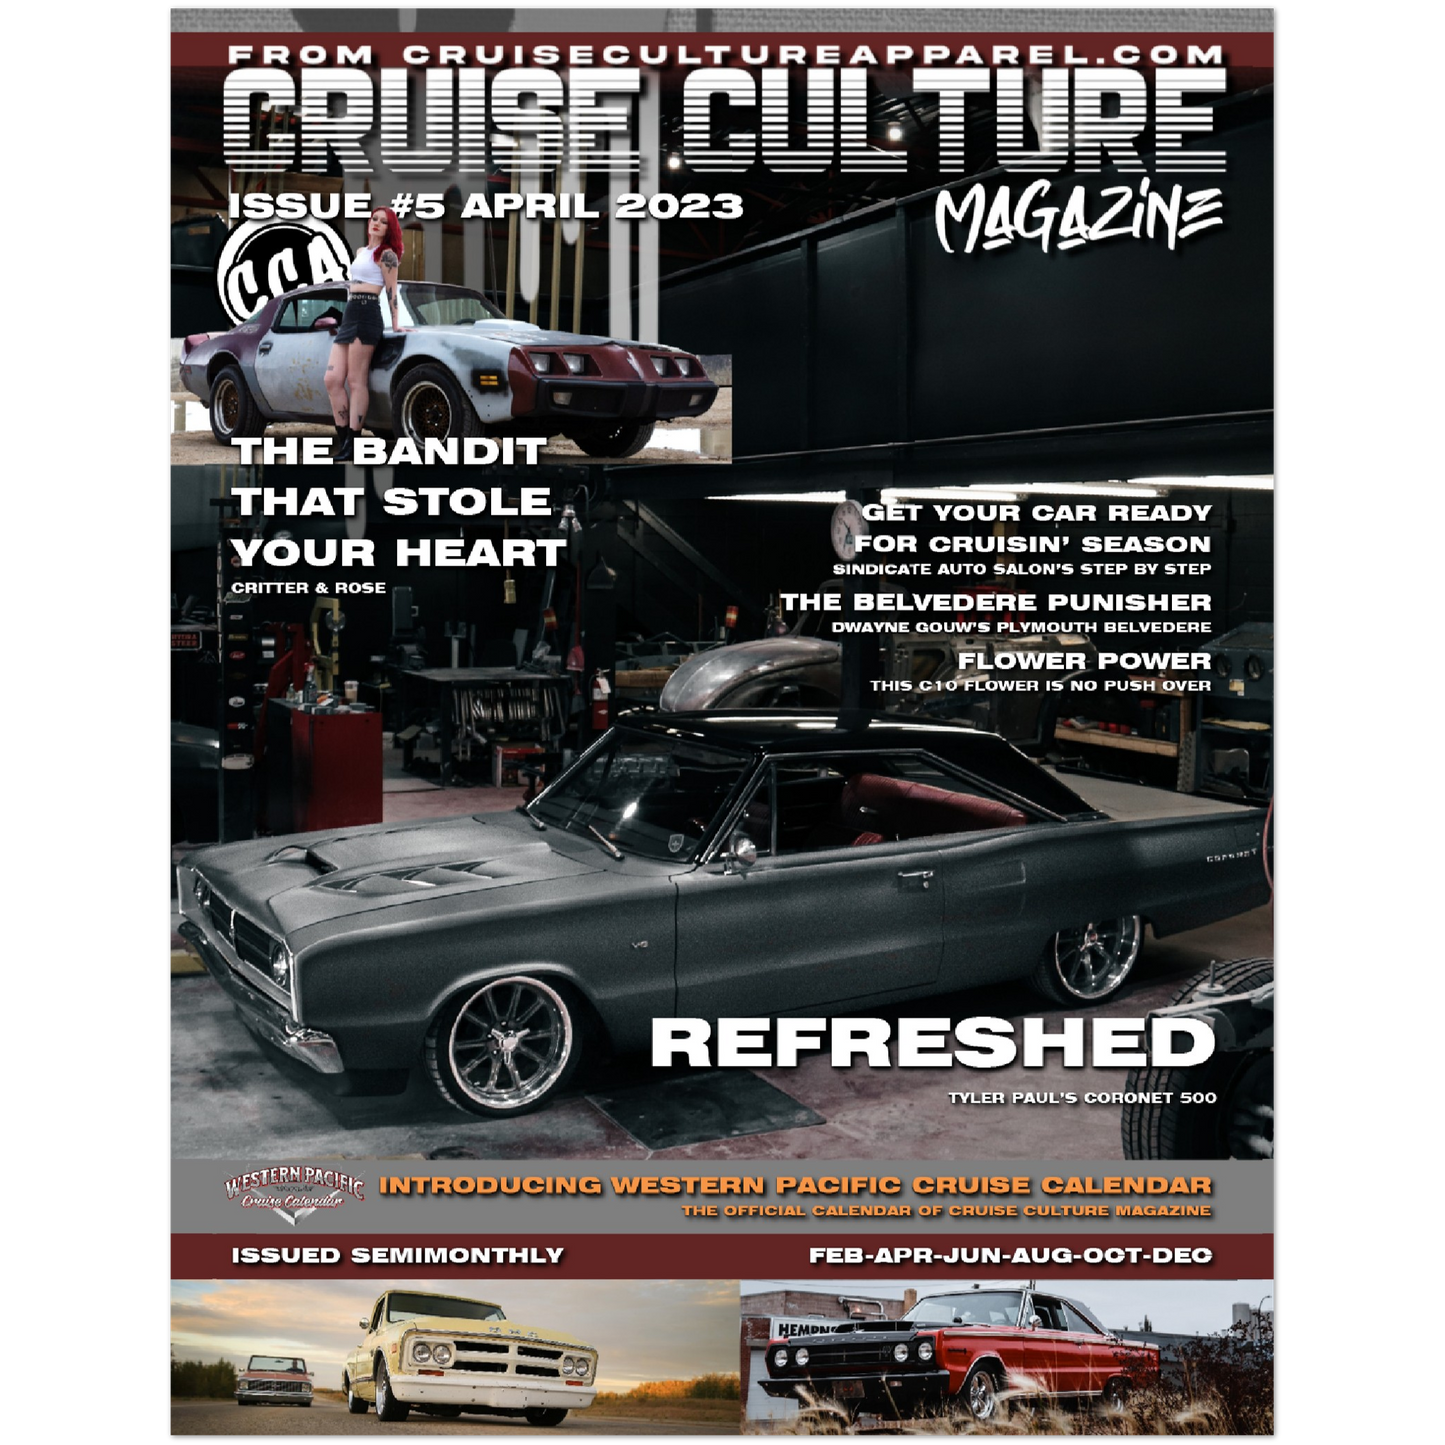 Cruise Culture Magazine - Issue #5 - April 2023 - Refreshed